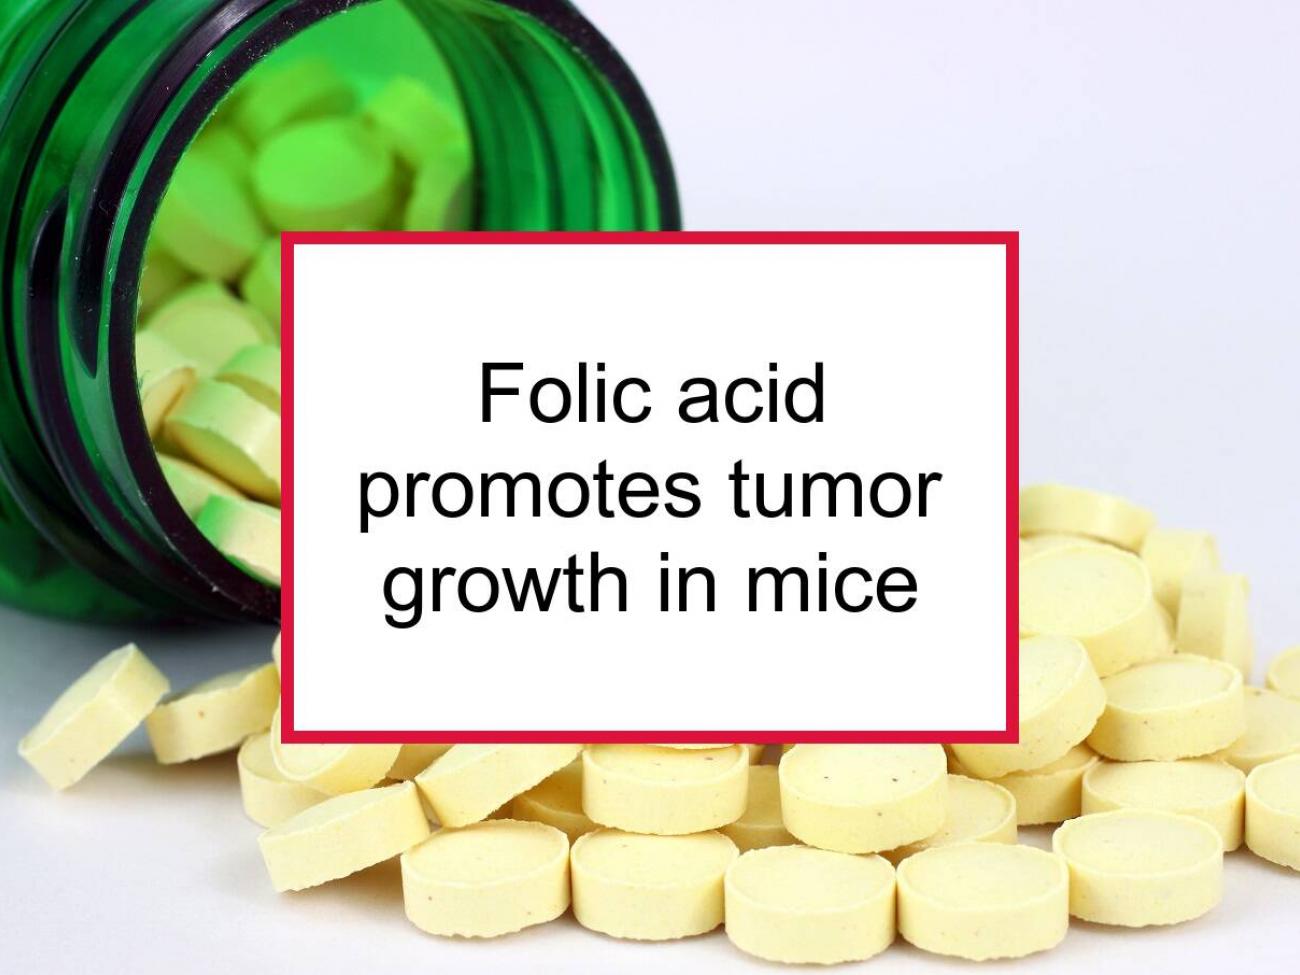 High Folic Acid Intake Promotes Growth Of Existing Tumors In Mice | Food  for Breast Cancer